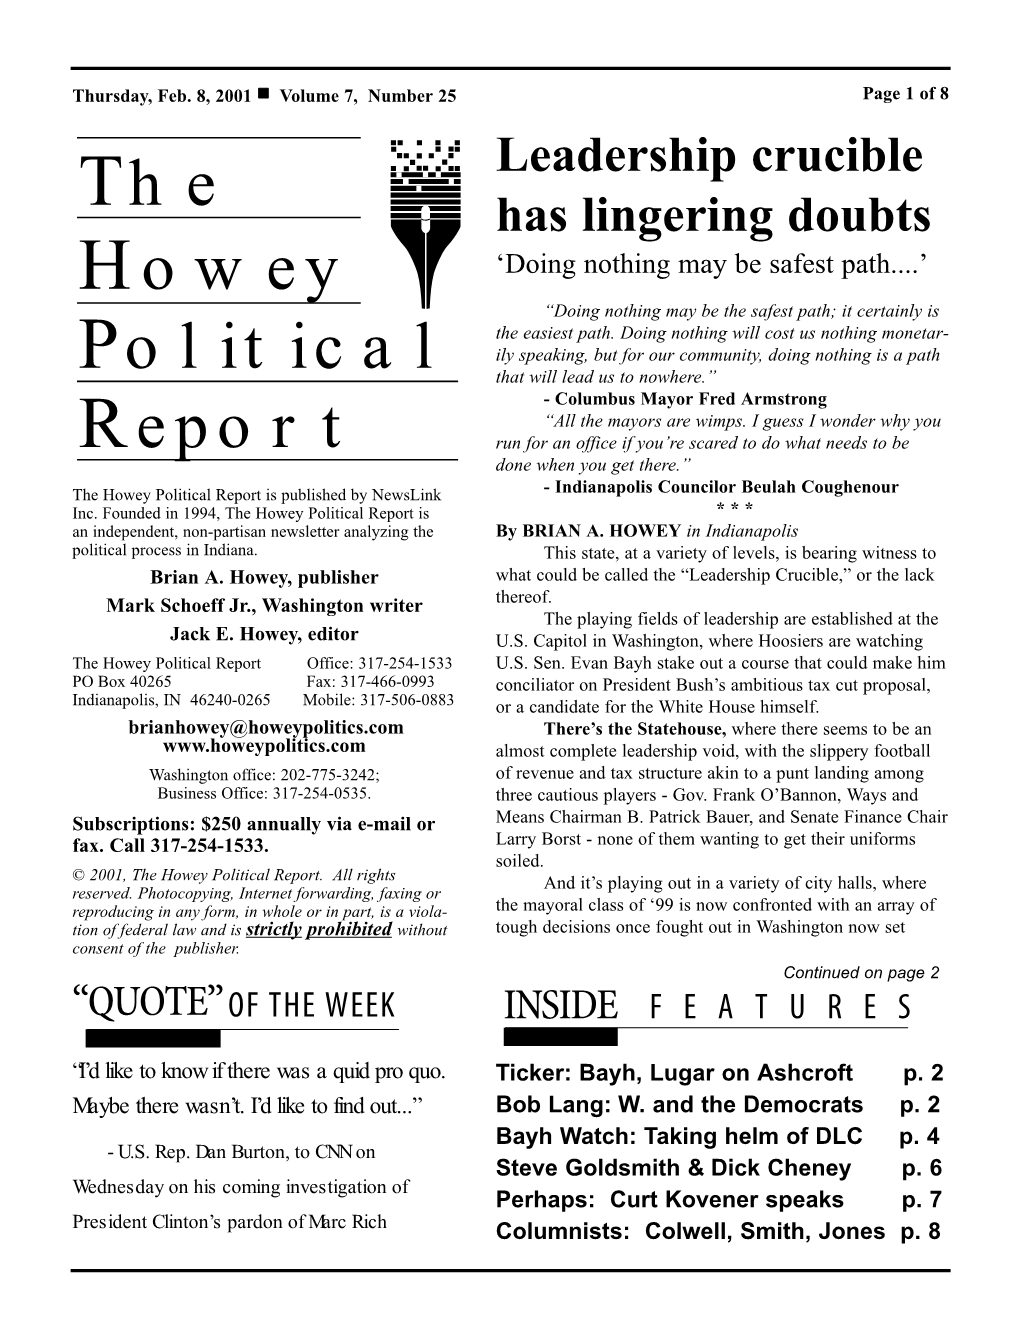 The Howey Political Report Is Published by Newslink - Indianapolis Councilor Beulah Coughenour Inc